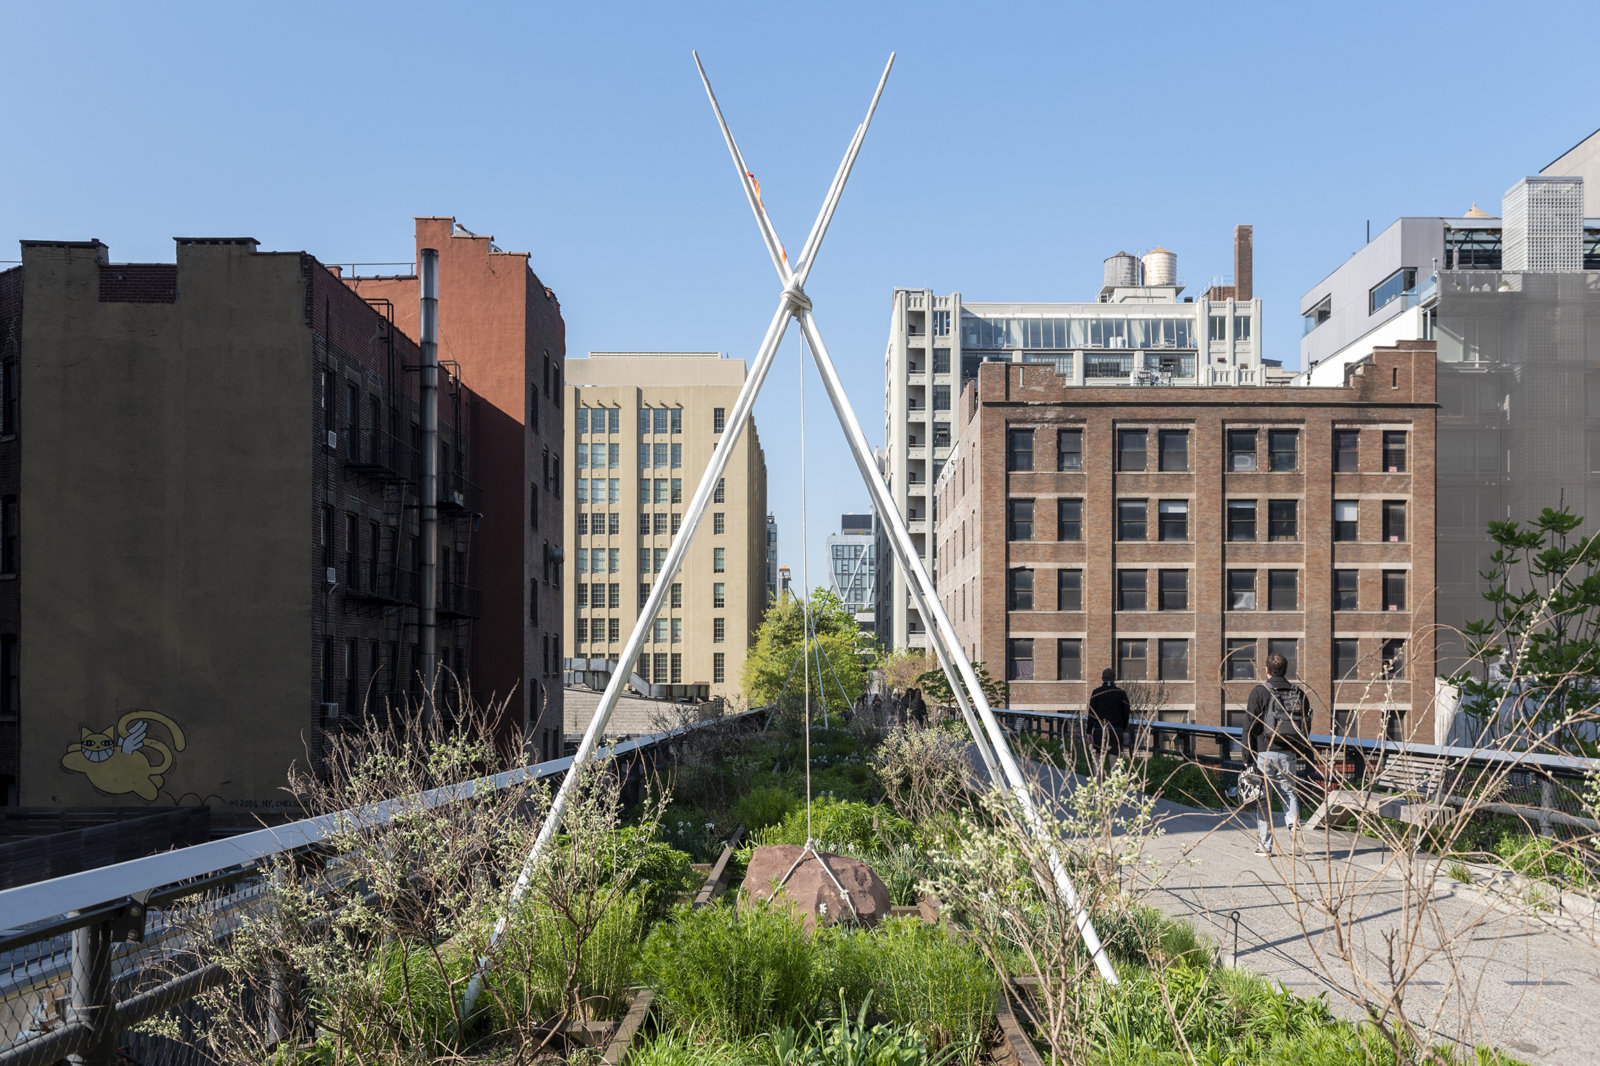 Duane Linklater, pêyakotênaw, 2018, tipi poles, rope, stones, flagging tape, paint, each approximately 181 x 143 x 143 in. (456 x 363 x 363 cm). Installation view, Agora, High Line Art, New York, 2018